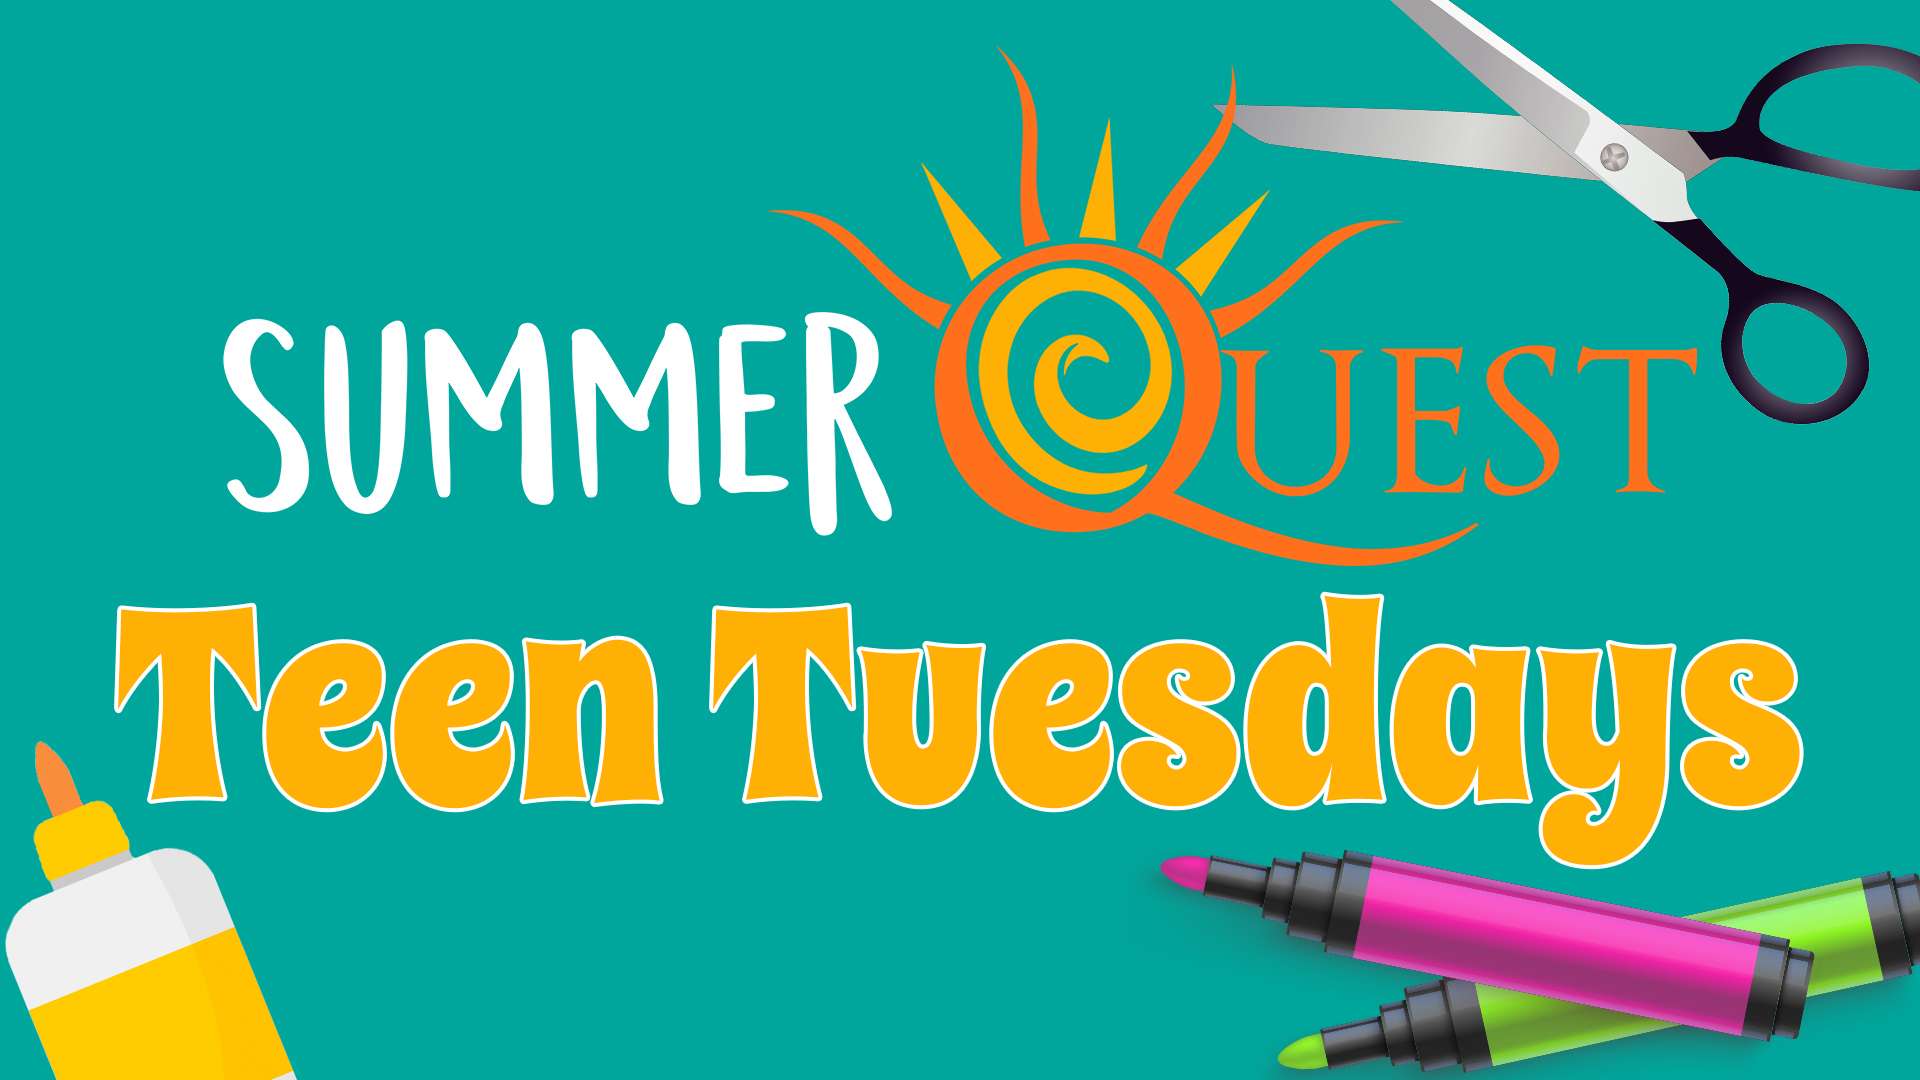 Image reads "SummerQuest Teen Tuesdays" against a teal background. Crafting supplies are scattered among the image.